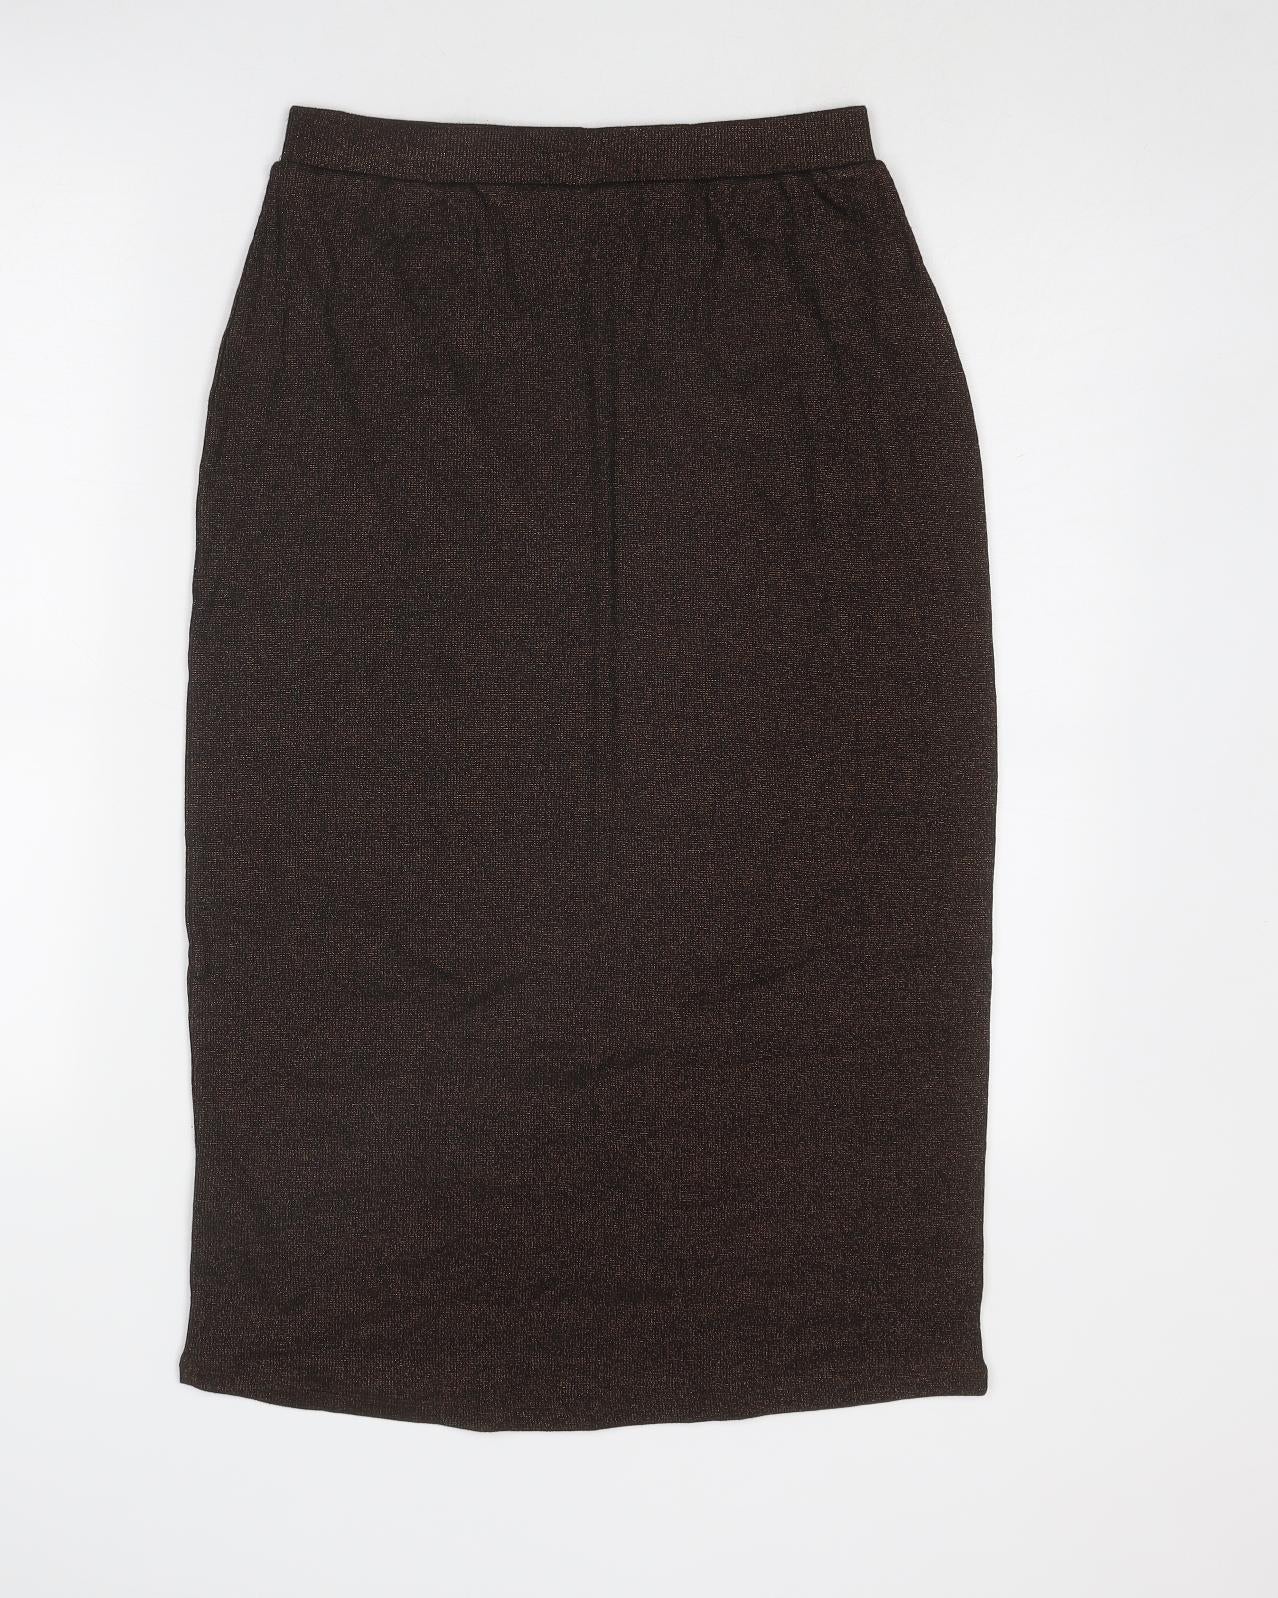 Marks and Spencer Womens Brown Cotton A-Line Skirt Size 10